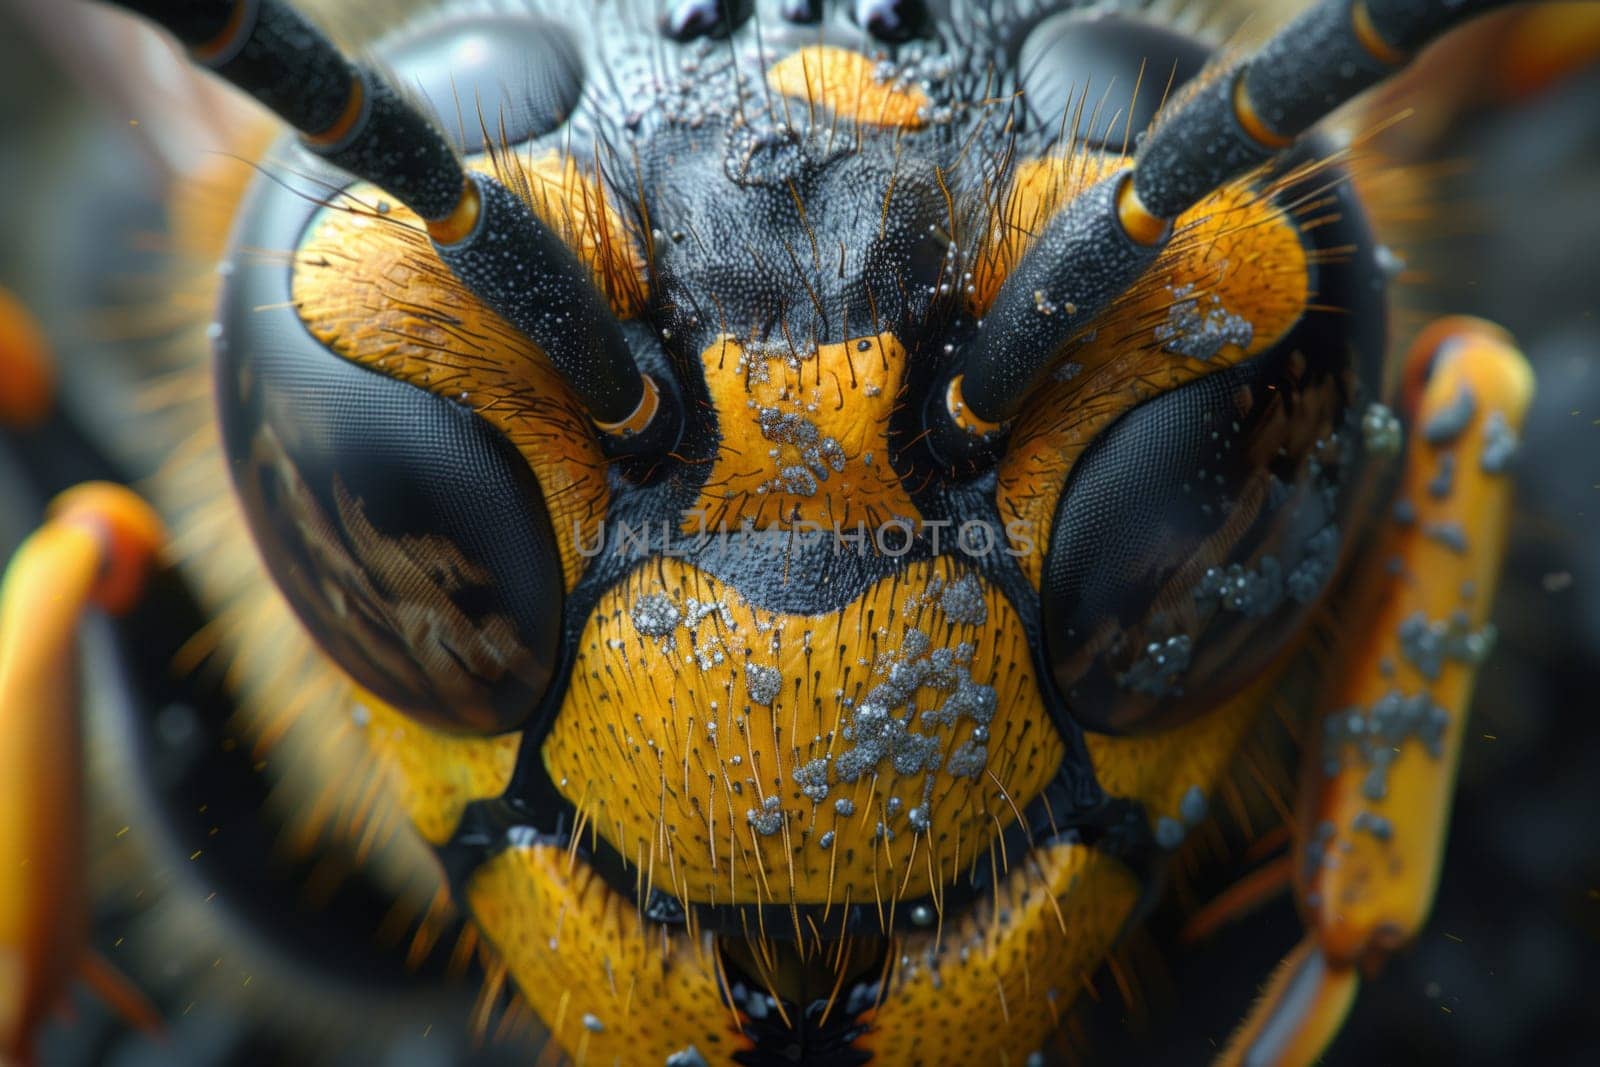 A detailed closeup of the head of a yellow and black wasp, showcasing its compound eyes and other features typical of an arthropod insect